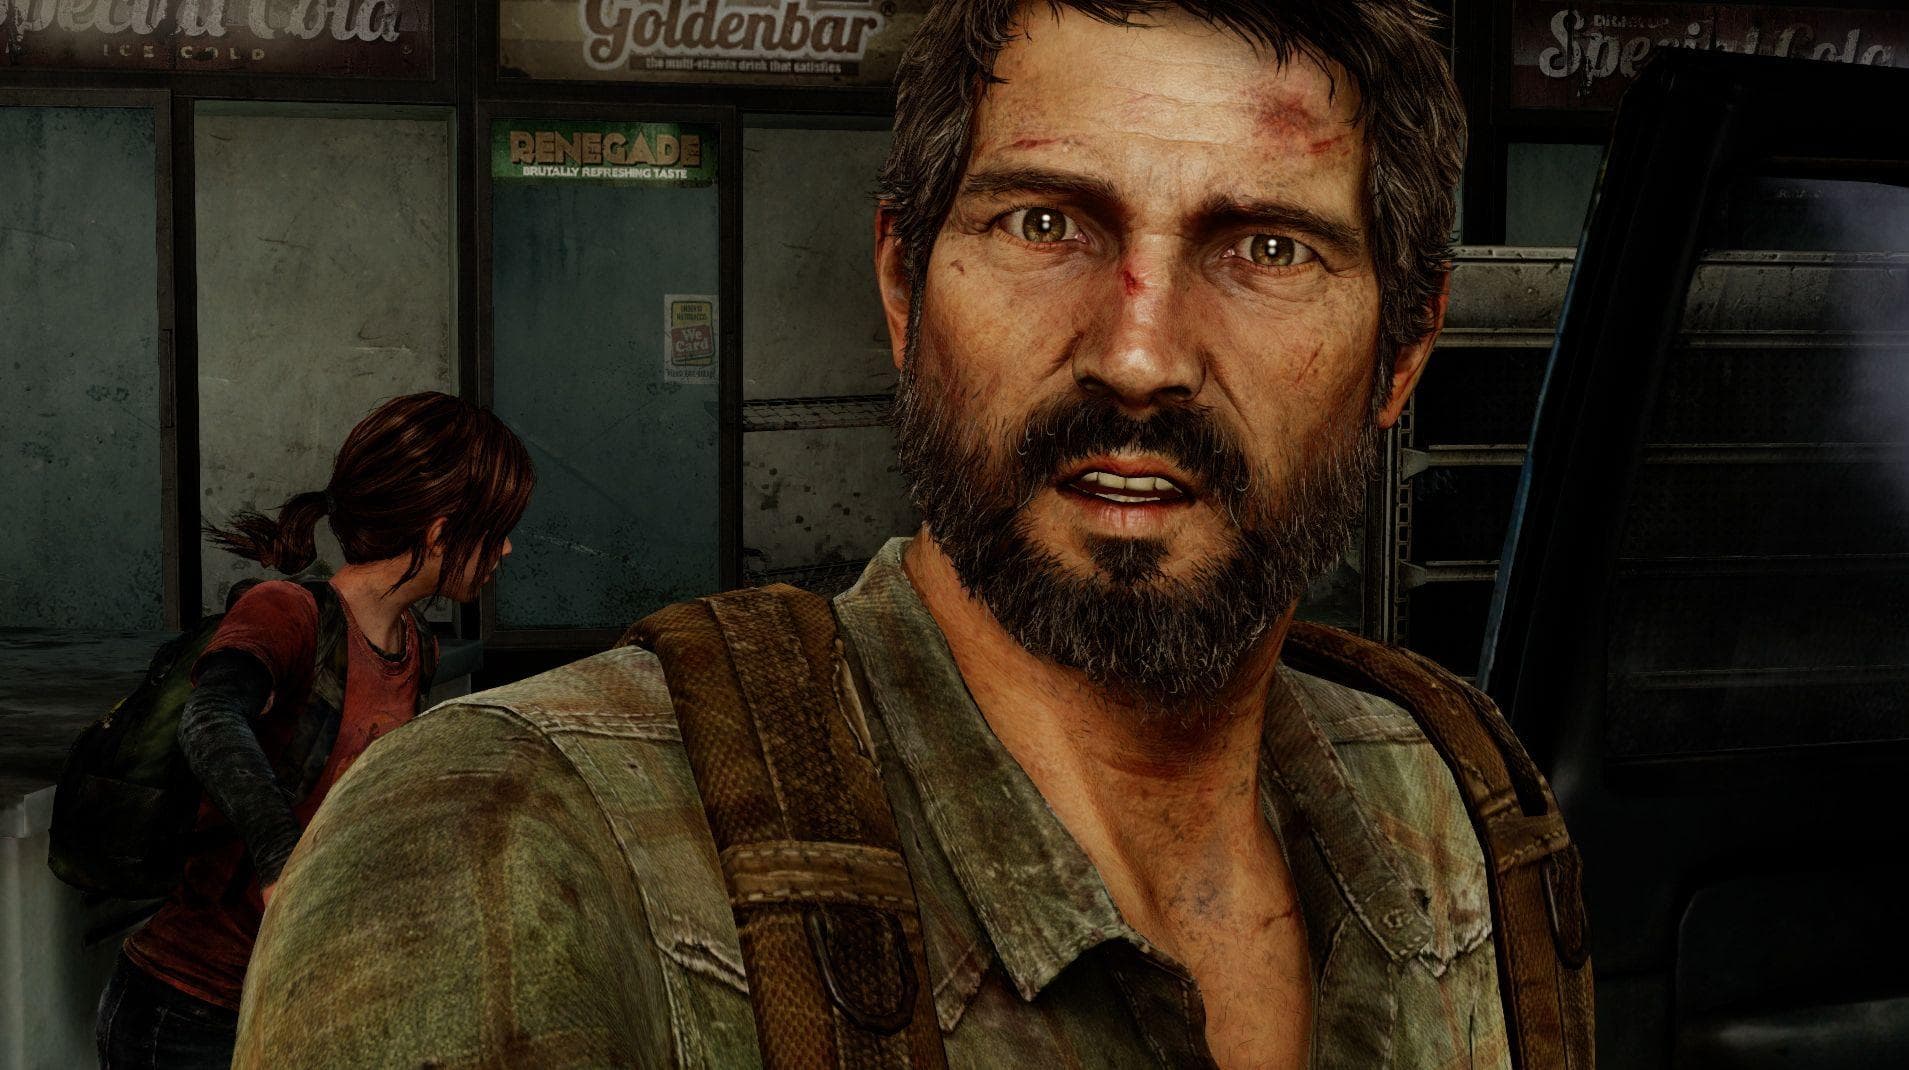 The Last of Us Episode 2 Confirms a Major Fan Theory